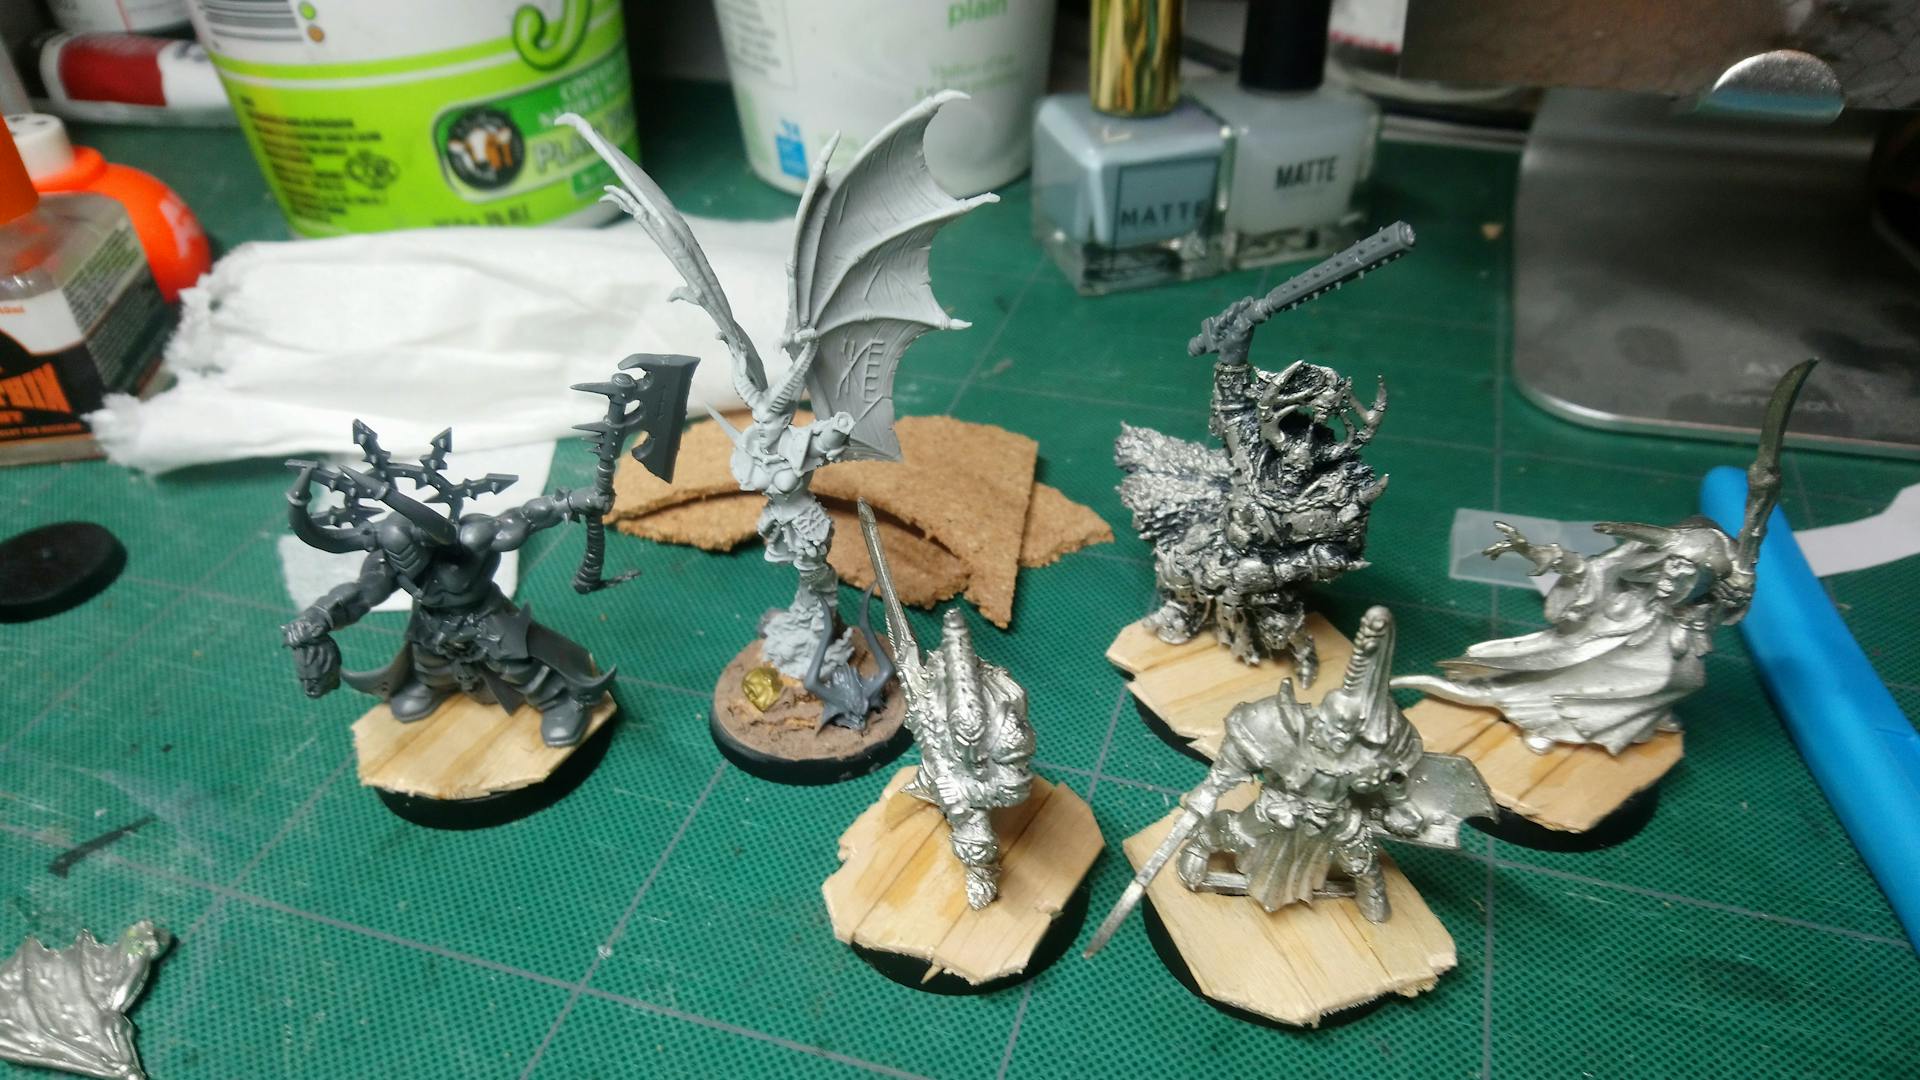 4 metal, 1 resin, and 1 plastic chaos minis on wood plank bases